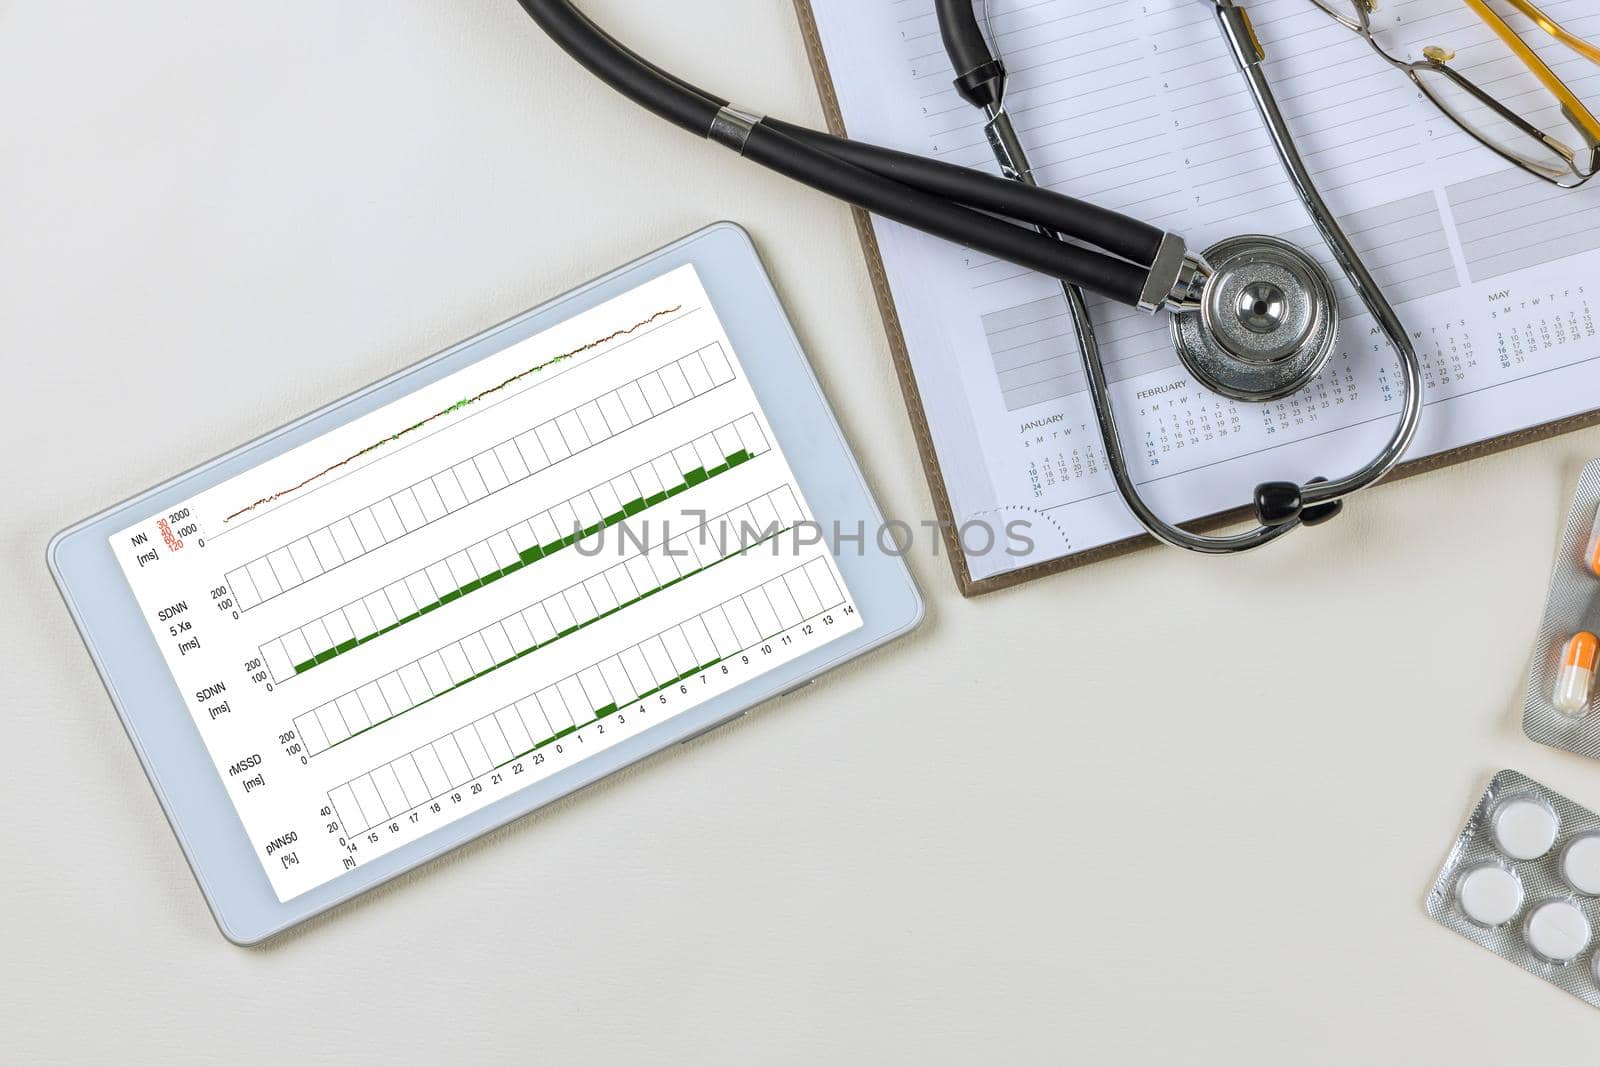 Cardiograph ekg electrocardiogram heart showing in tablet with medical documents on desk of doctor by ungvar